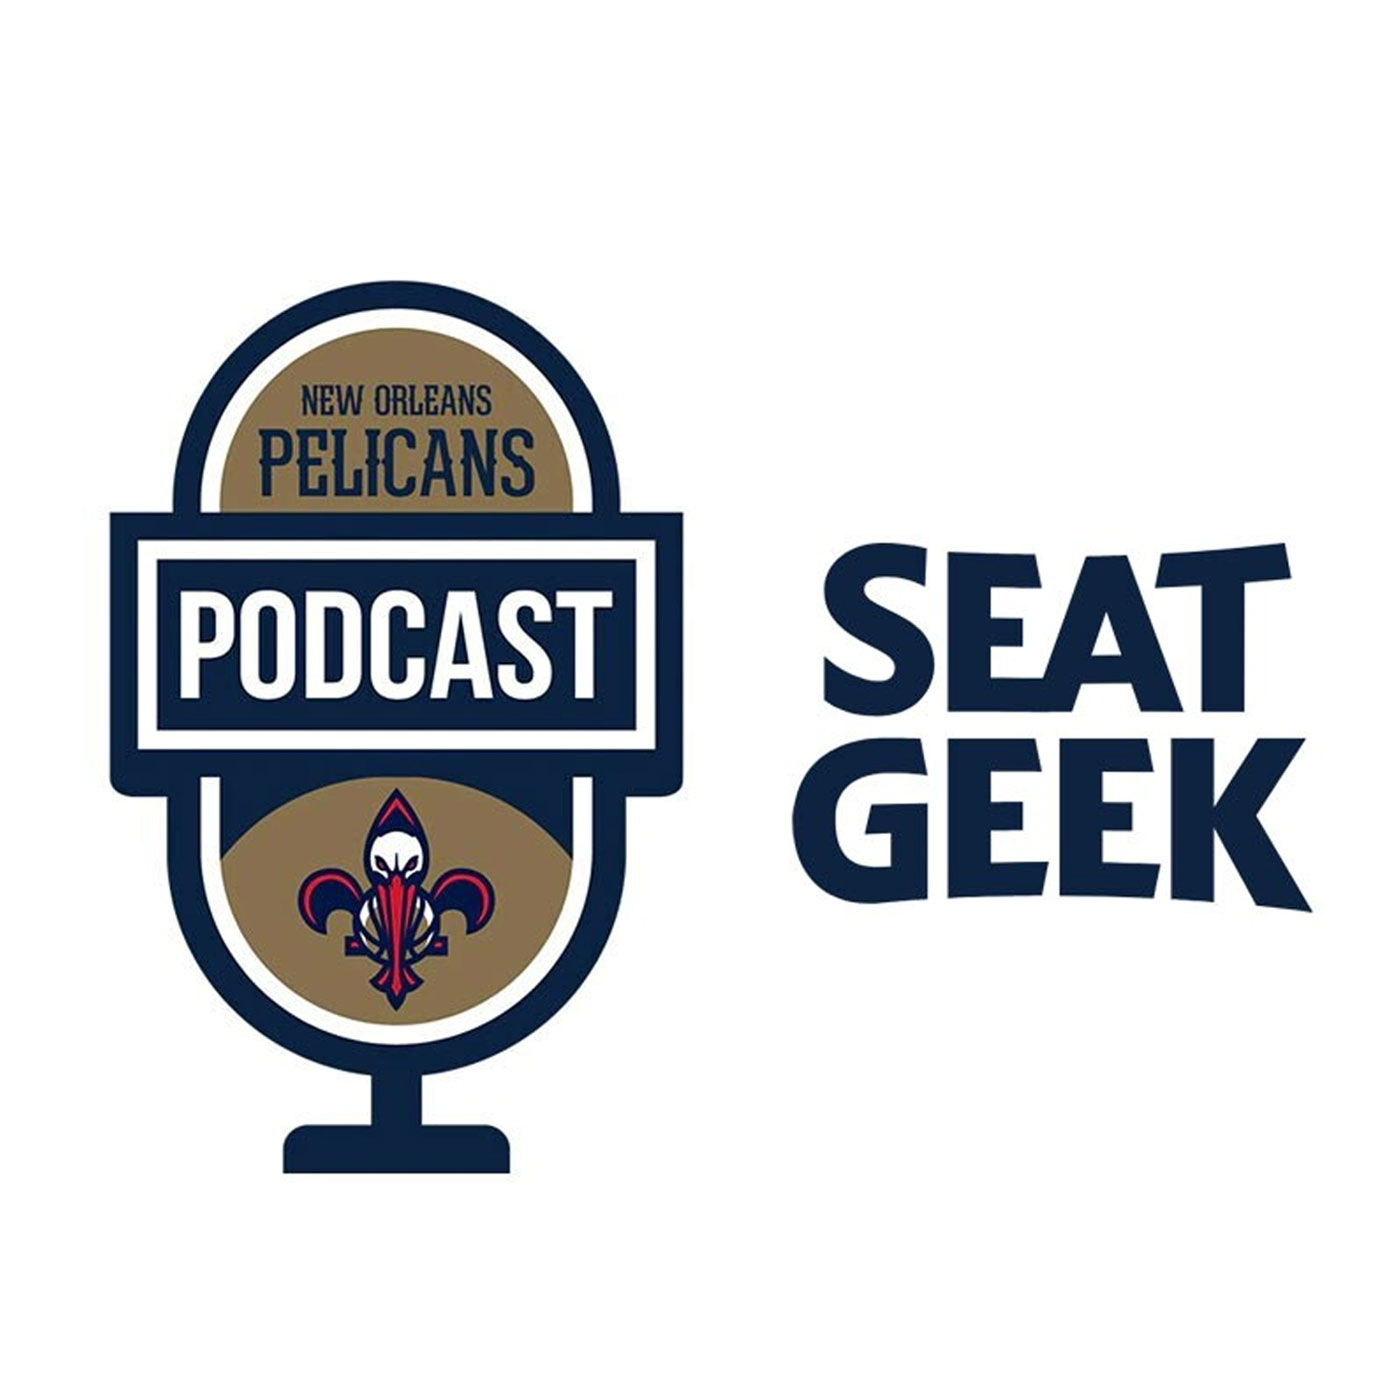 Brian Anderson on the New Orleans Pelicans Podcast presented by SeatGeek - November 1, 2021